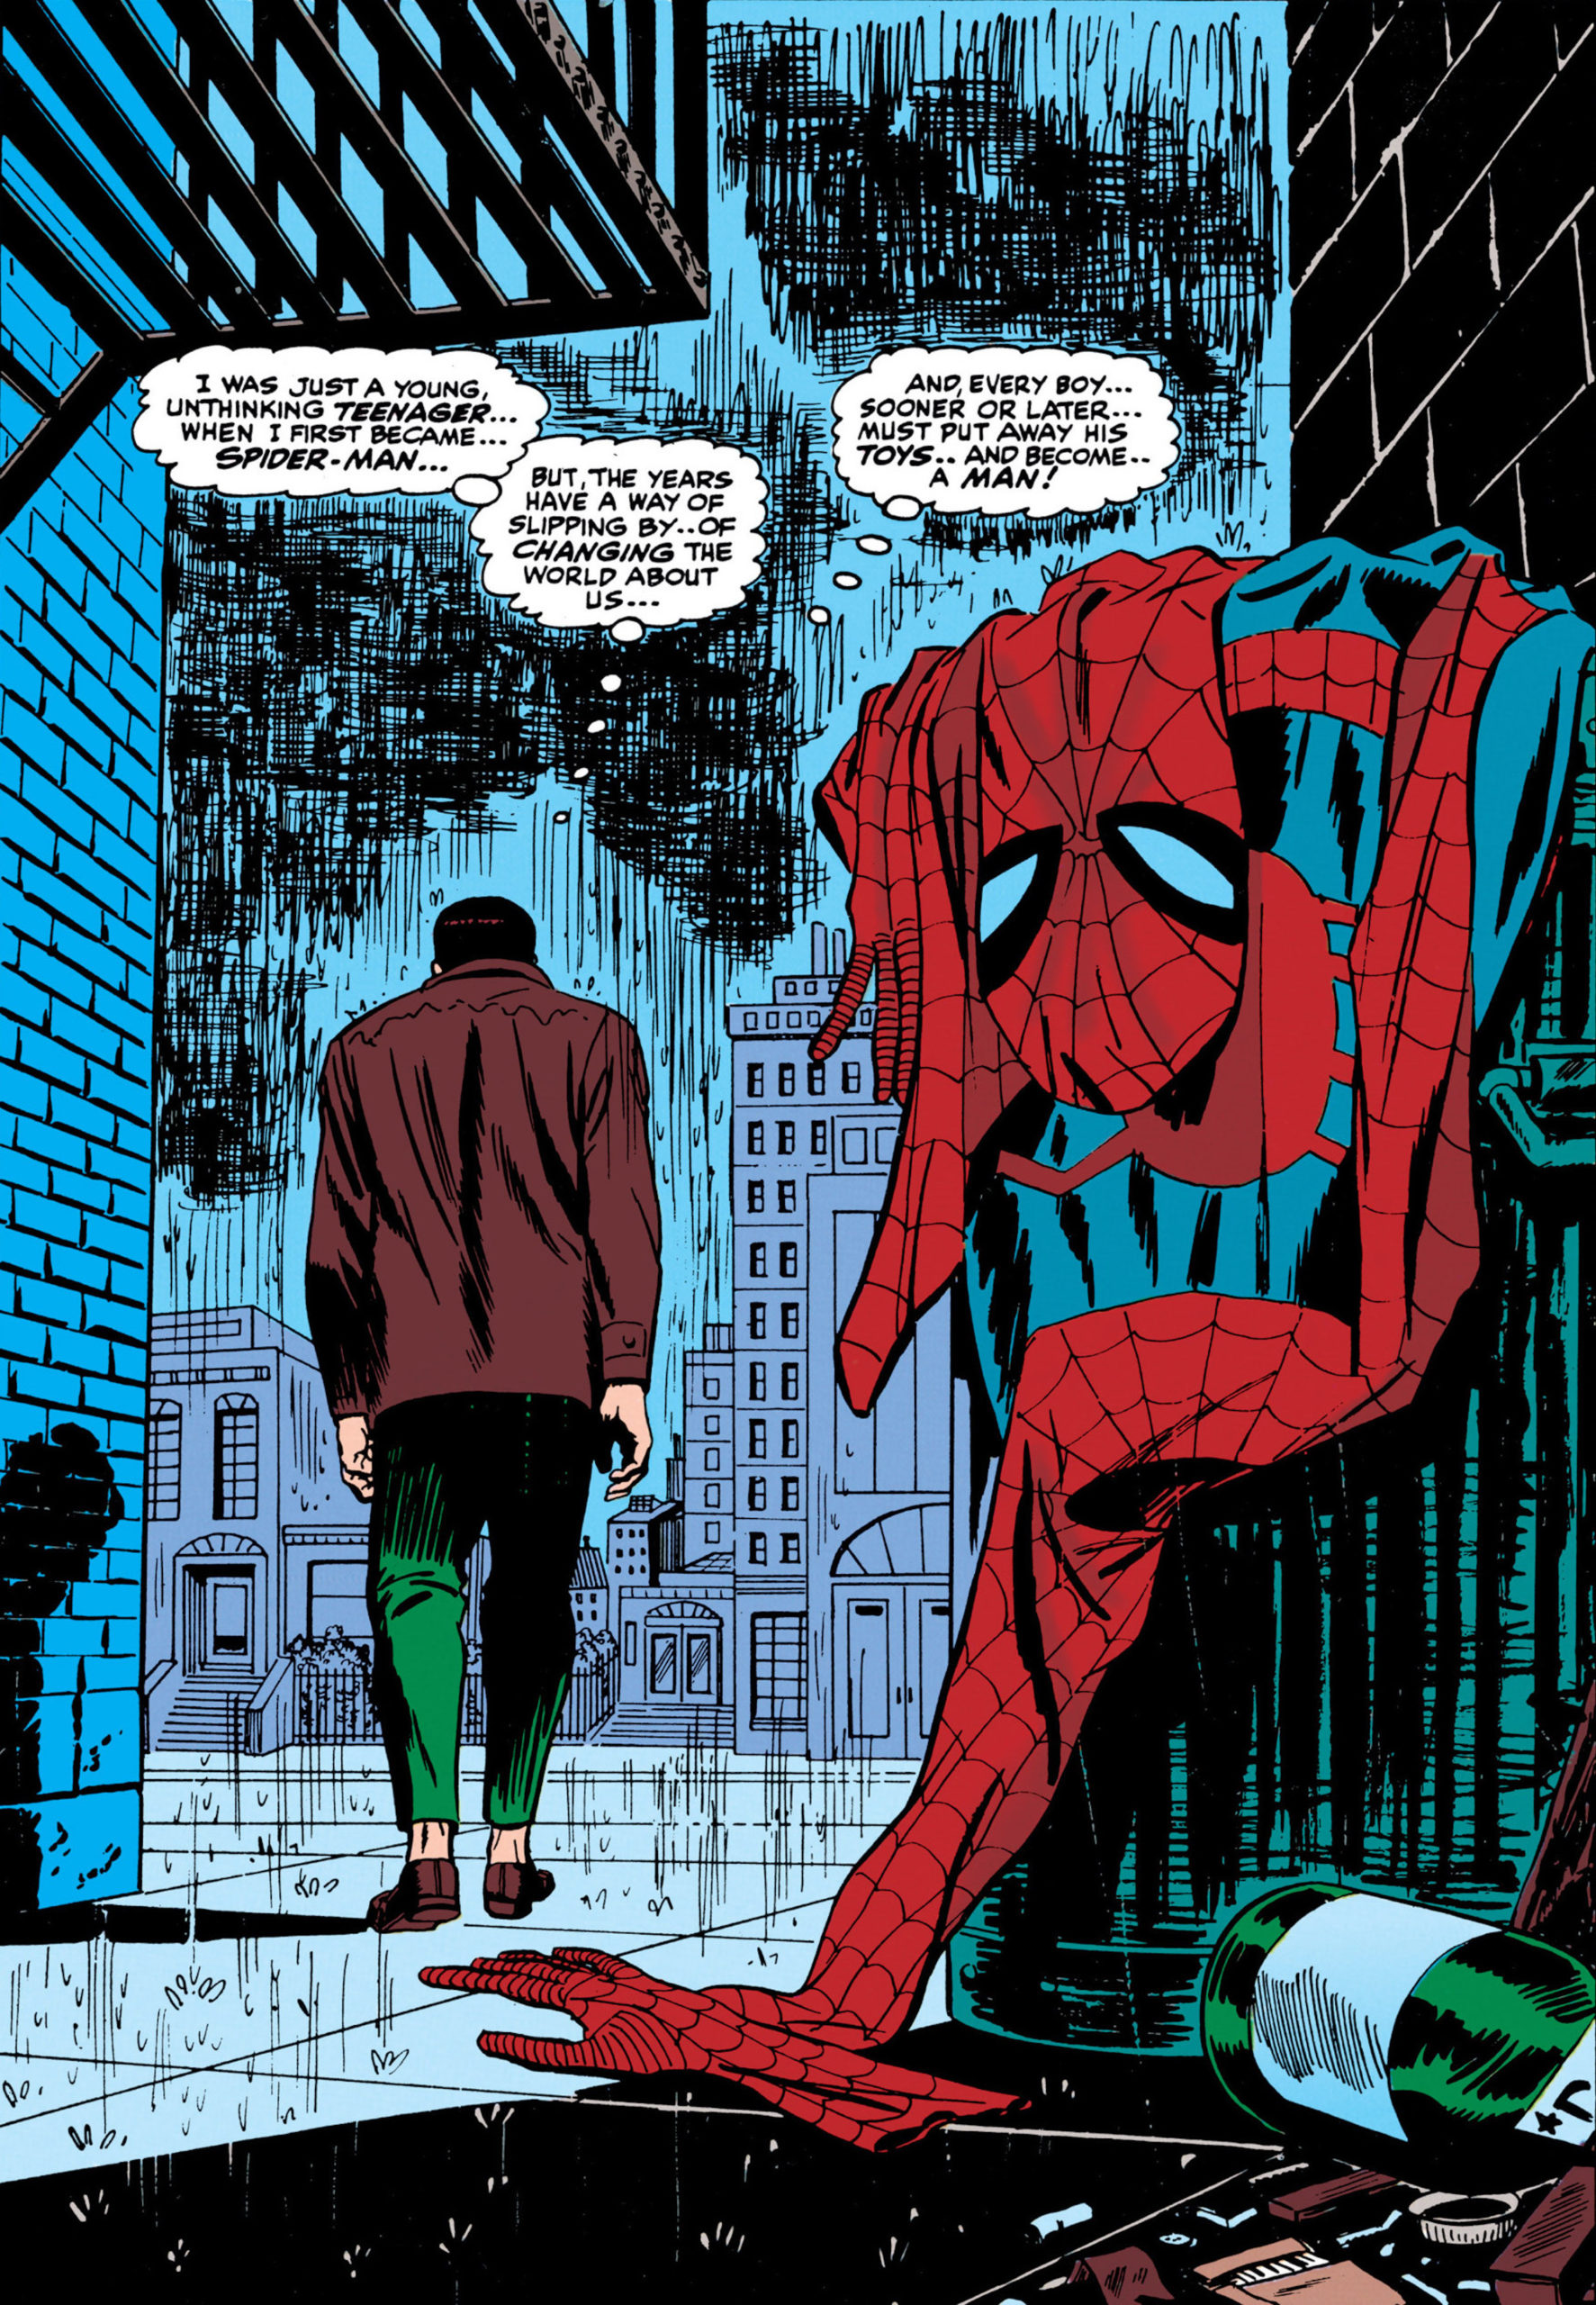 This is an image from The Amazing Spider-Man #50 (1967), where Peter Parker threw his Spider-Man outfit in the trash and walked away. 